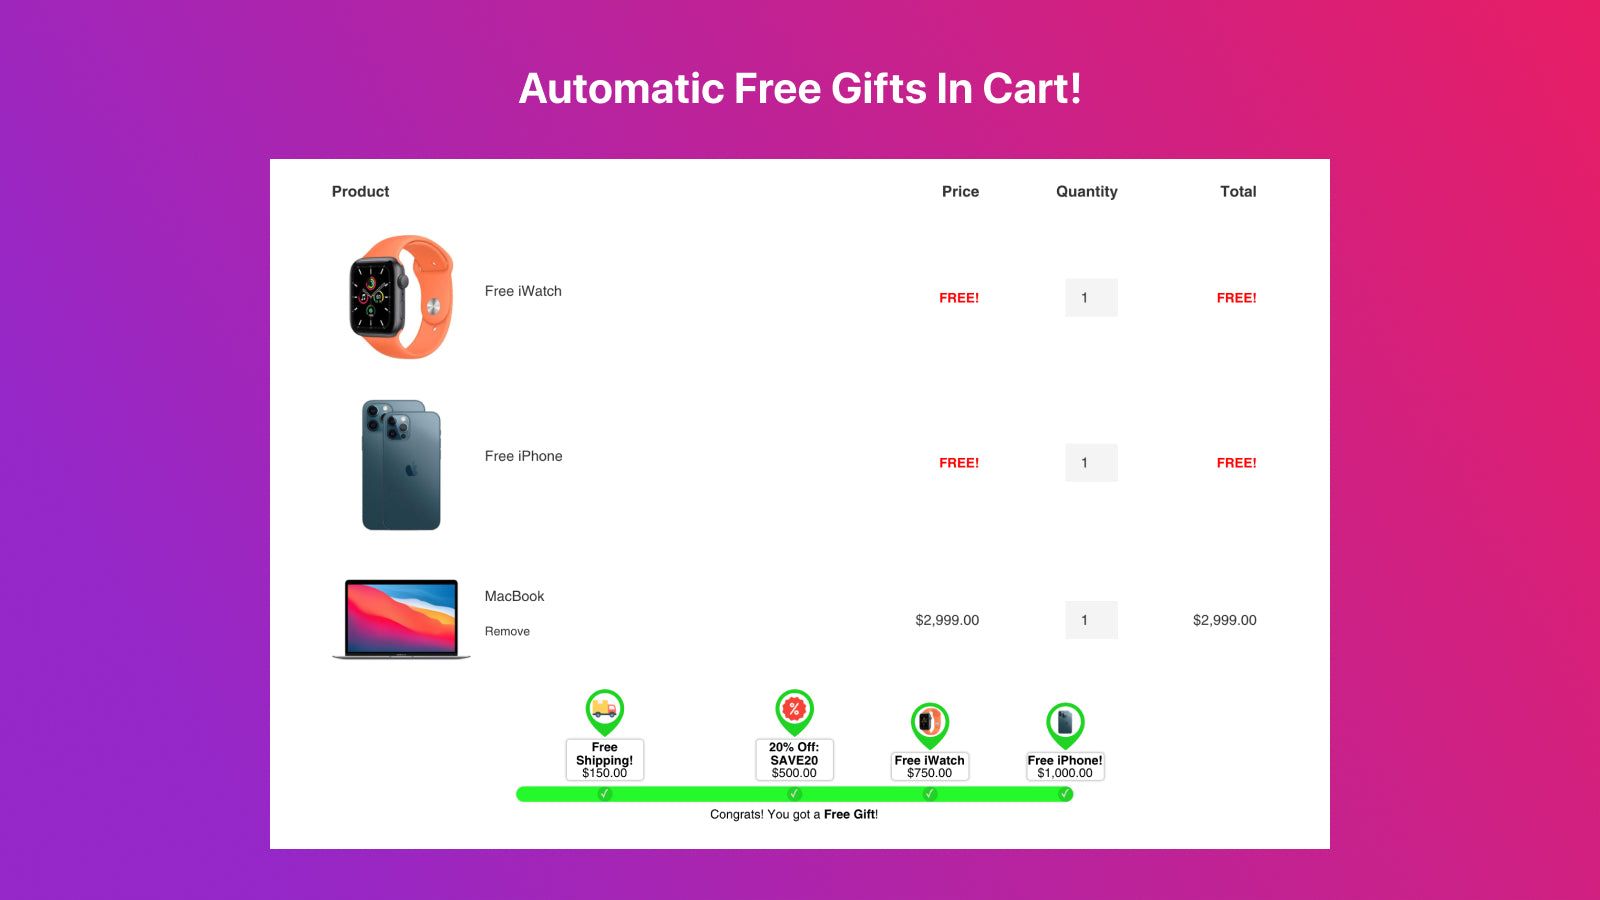 Automatic Free Gifts In Cart! Automatic freebies